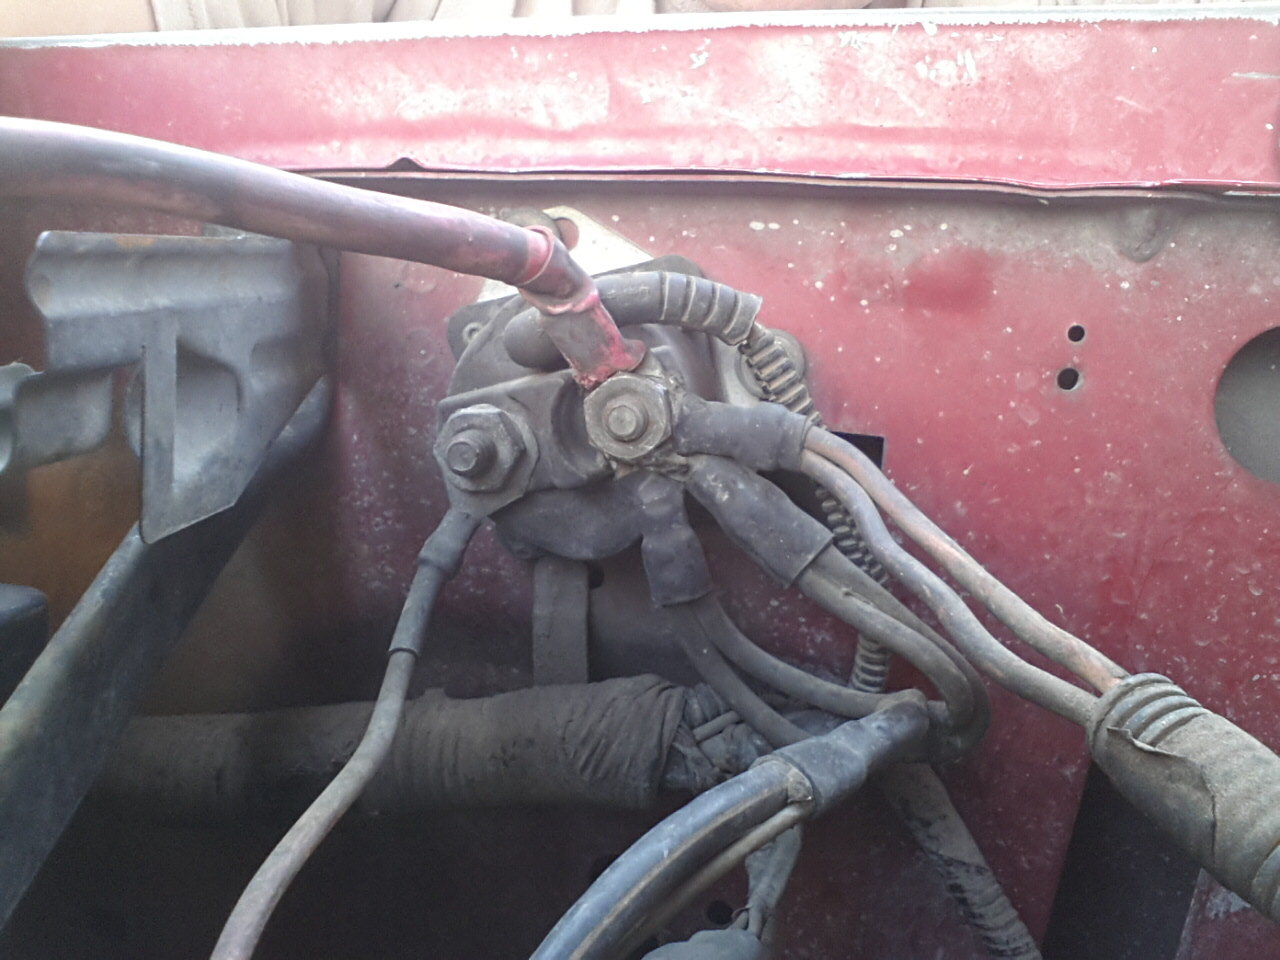 1993 F350 7.3 fender solenoid wiring - Ford Truck Enthusiasts Forums